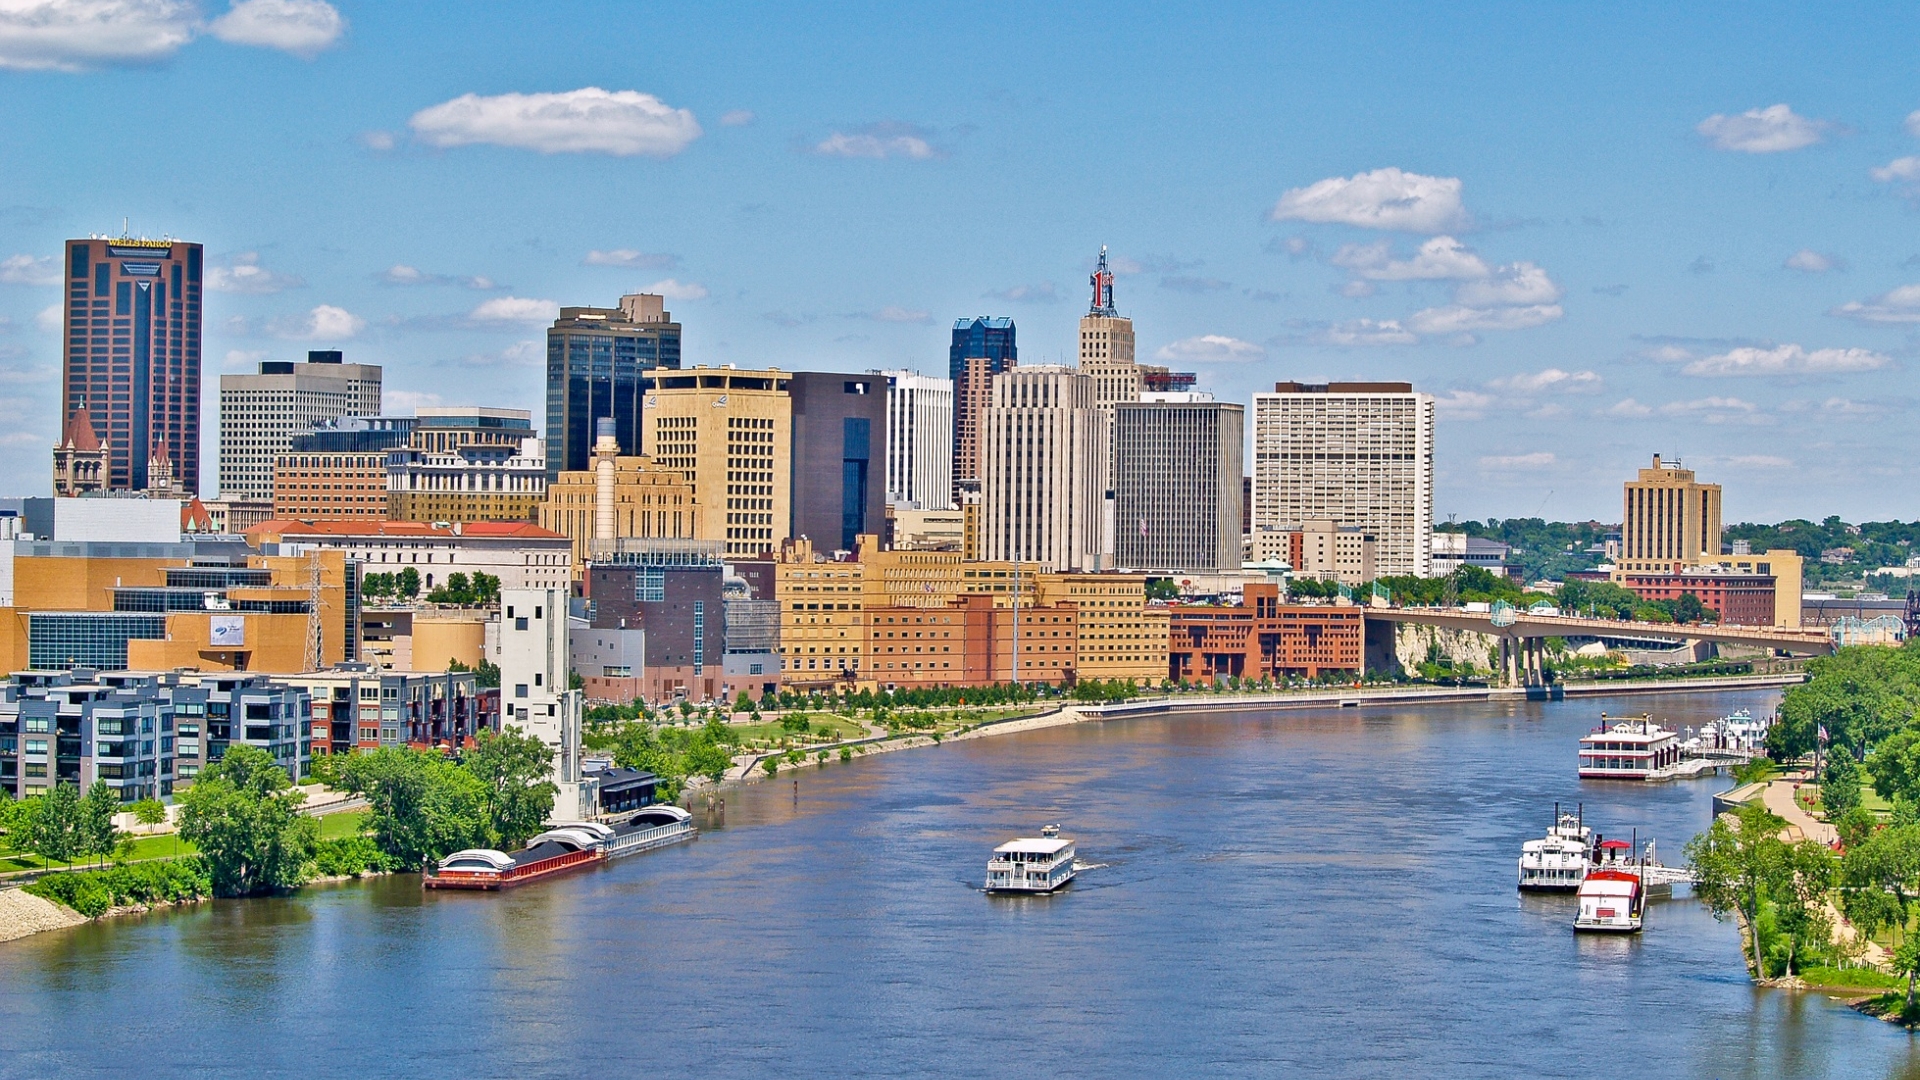 Saint Paul is one of the best cities for runners